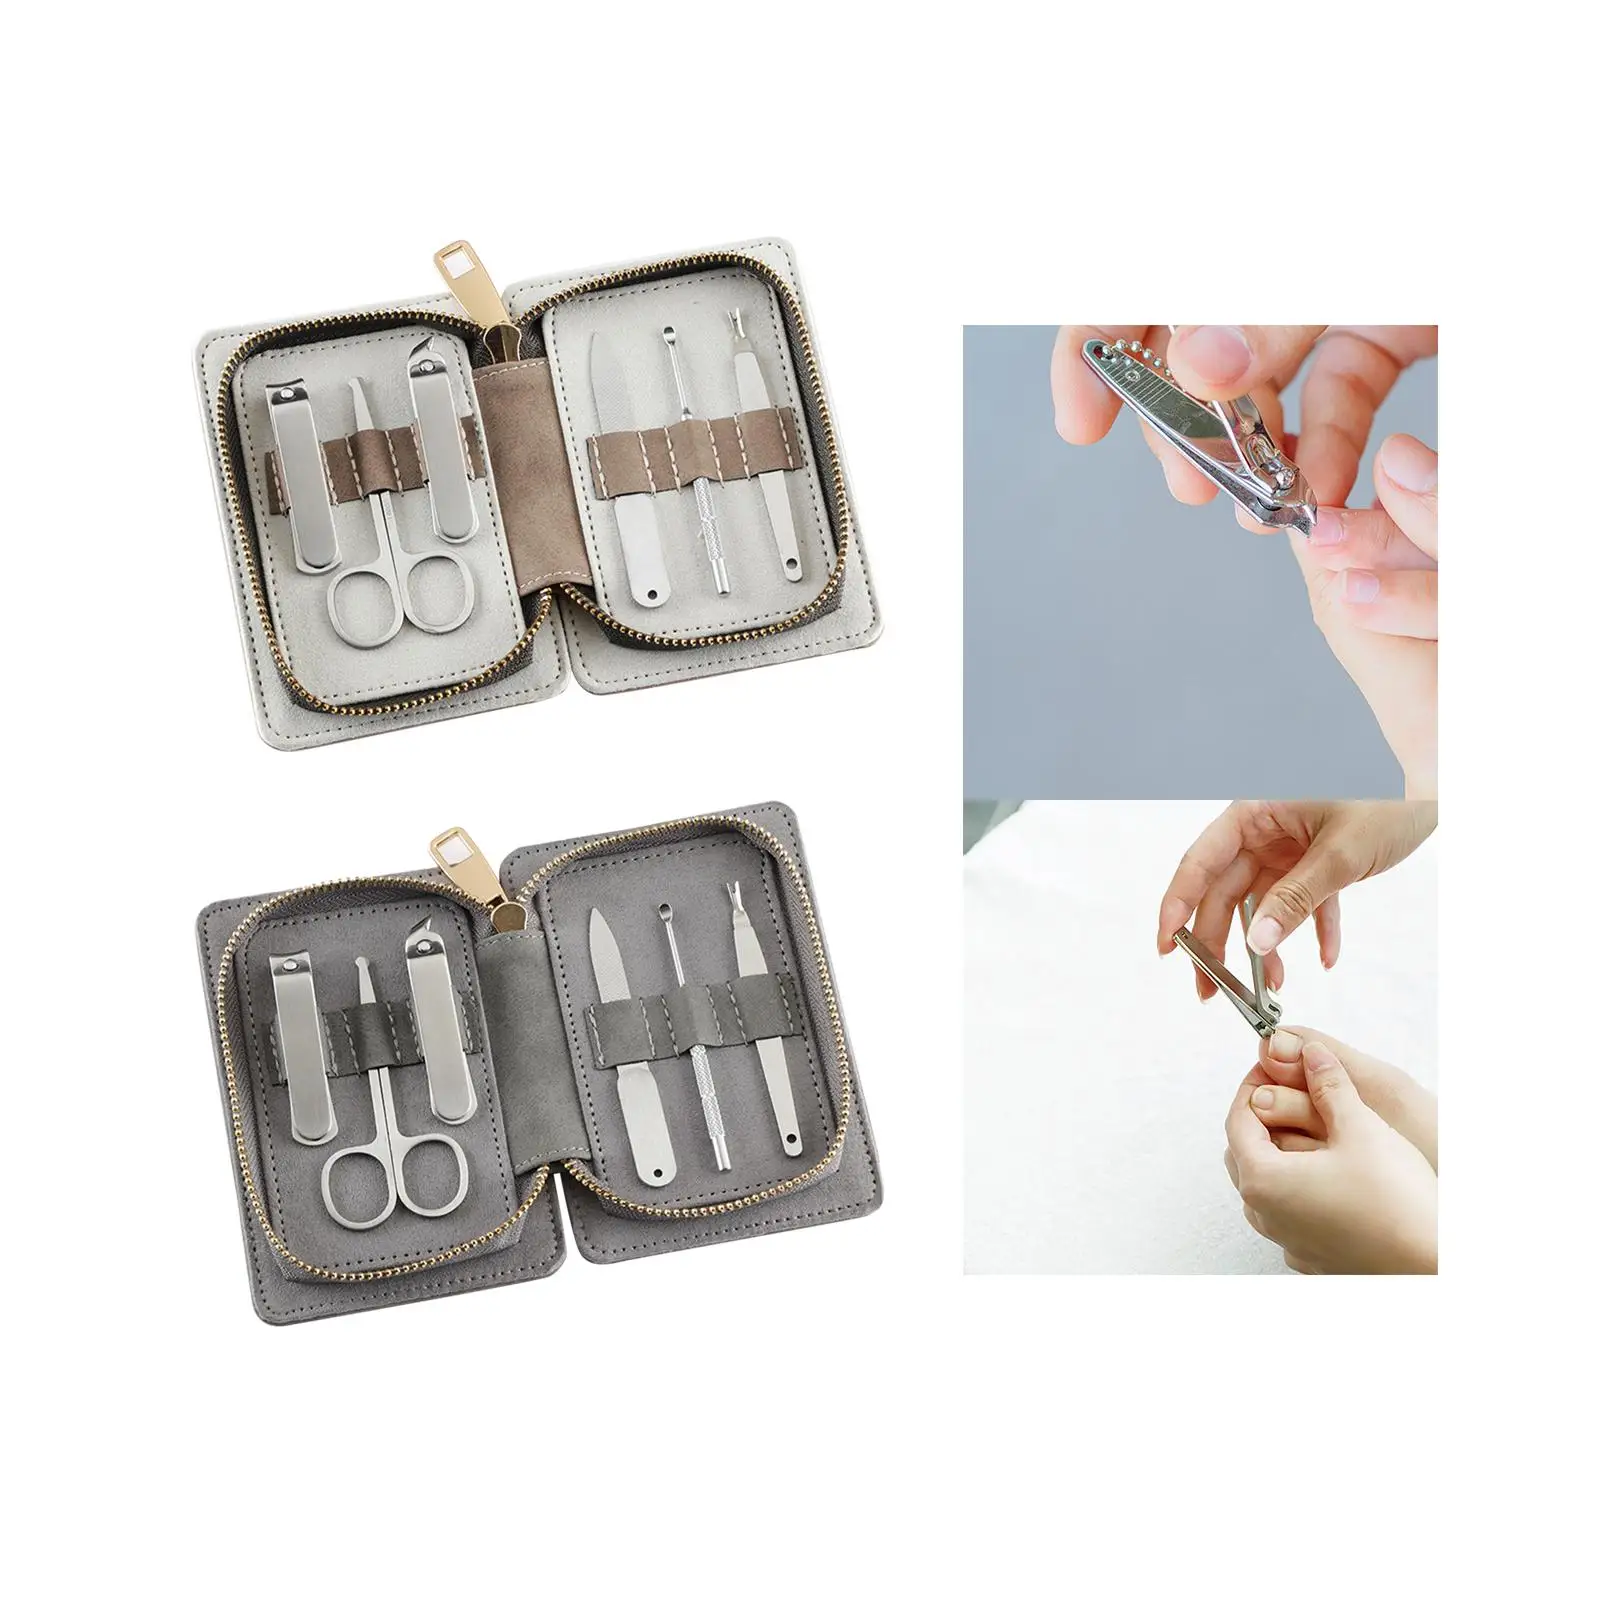 6x Portable Manicure Kit Fingernails Toenails with Case Grooming Kit Gift Professional Nail Clippers Pedicure Kit for Travel